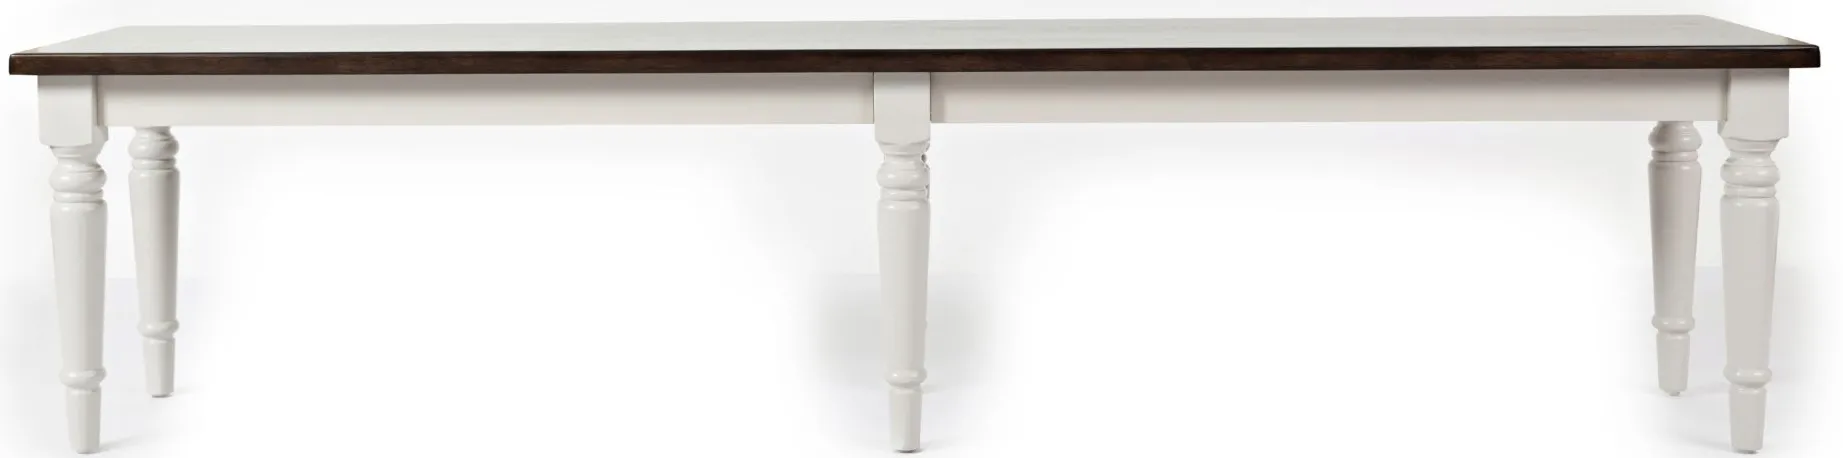 Mount Vernon Dining Bench in Puddy/Cocoa by Jofran